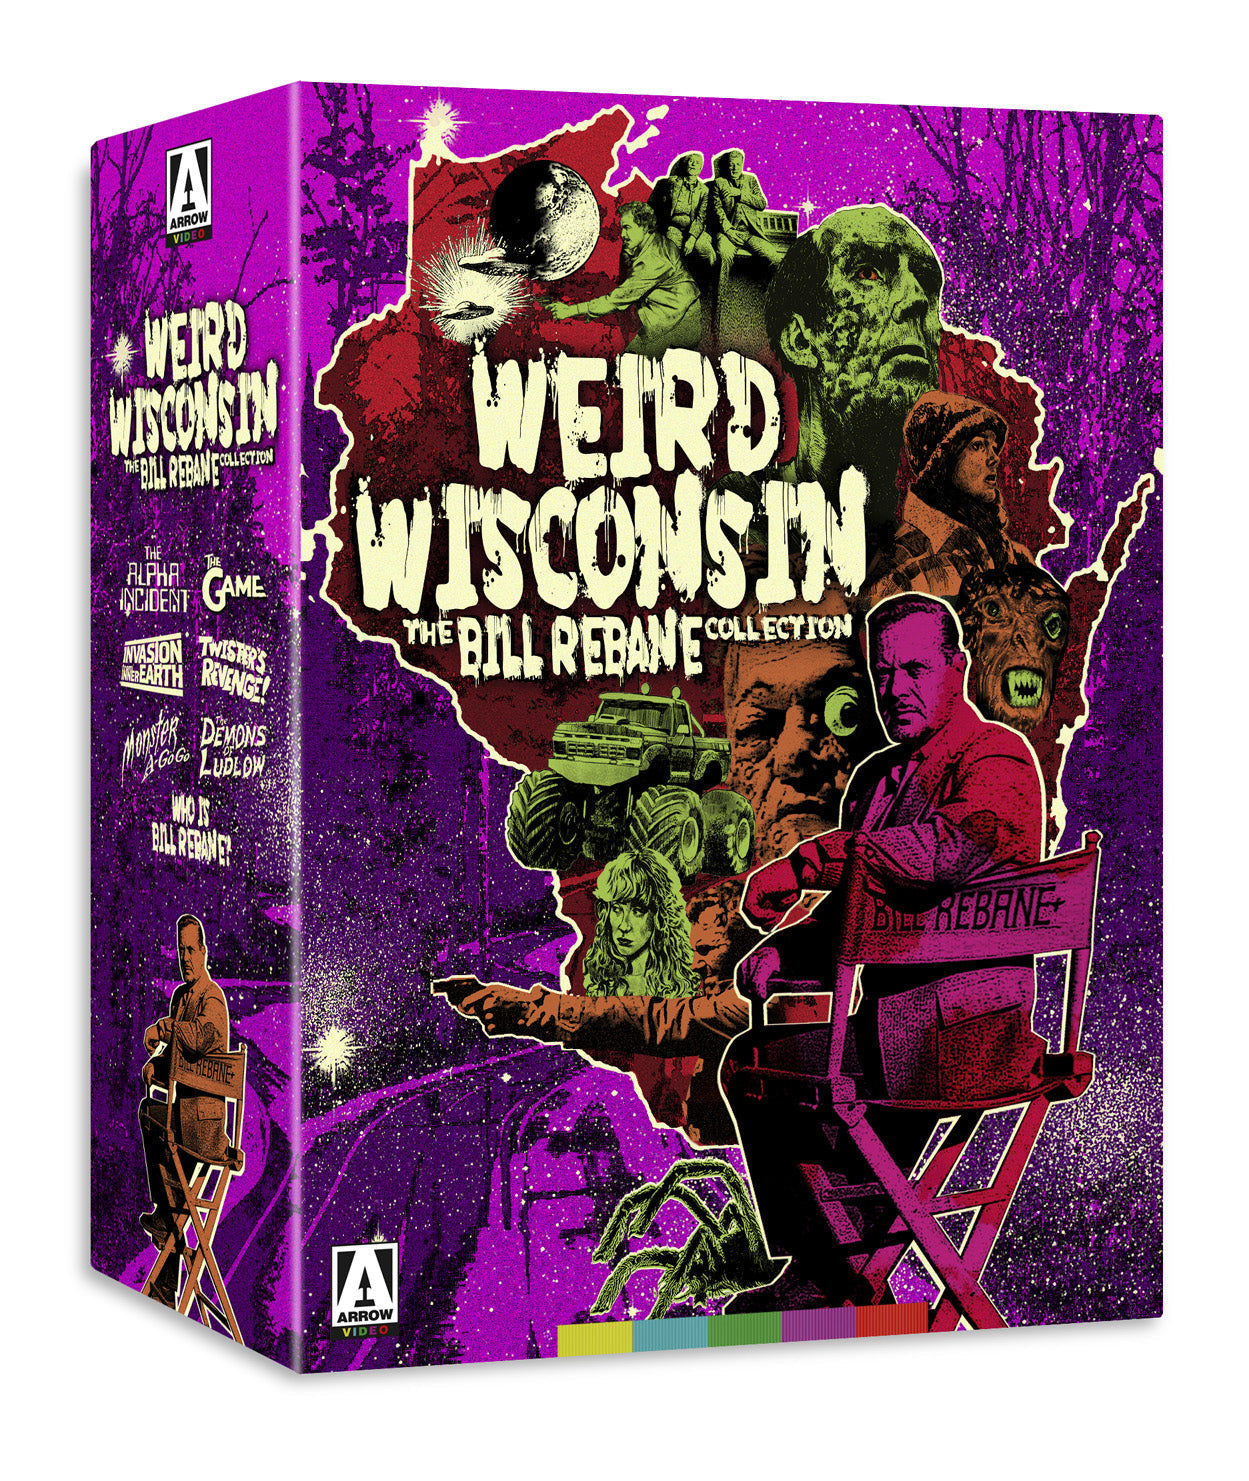 Weird Wisconsin: The Bill Rebane Collection (Limited Edition) Blu-Ray Blu-Ray